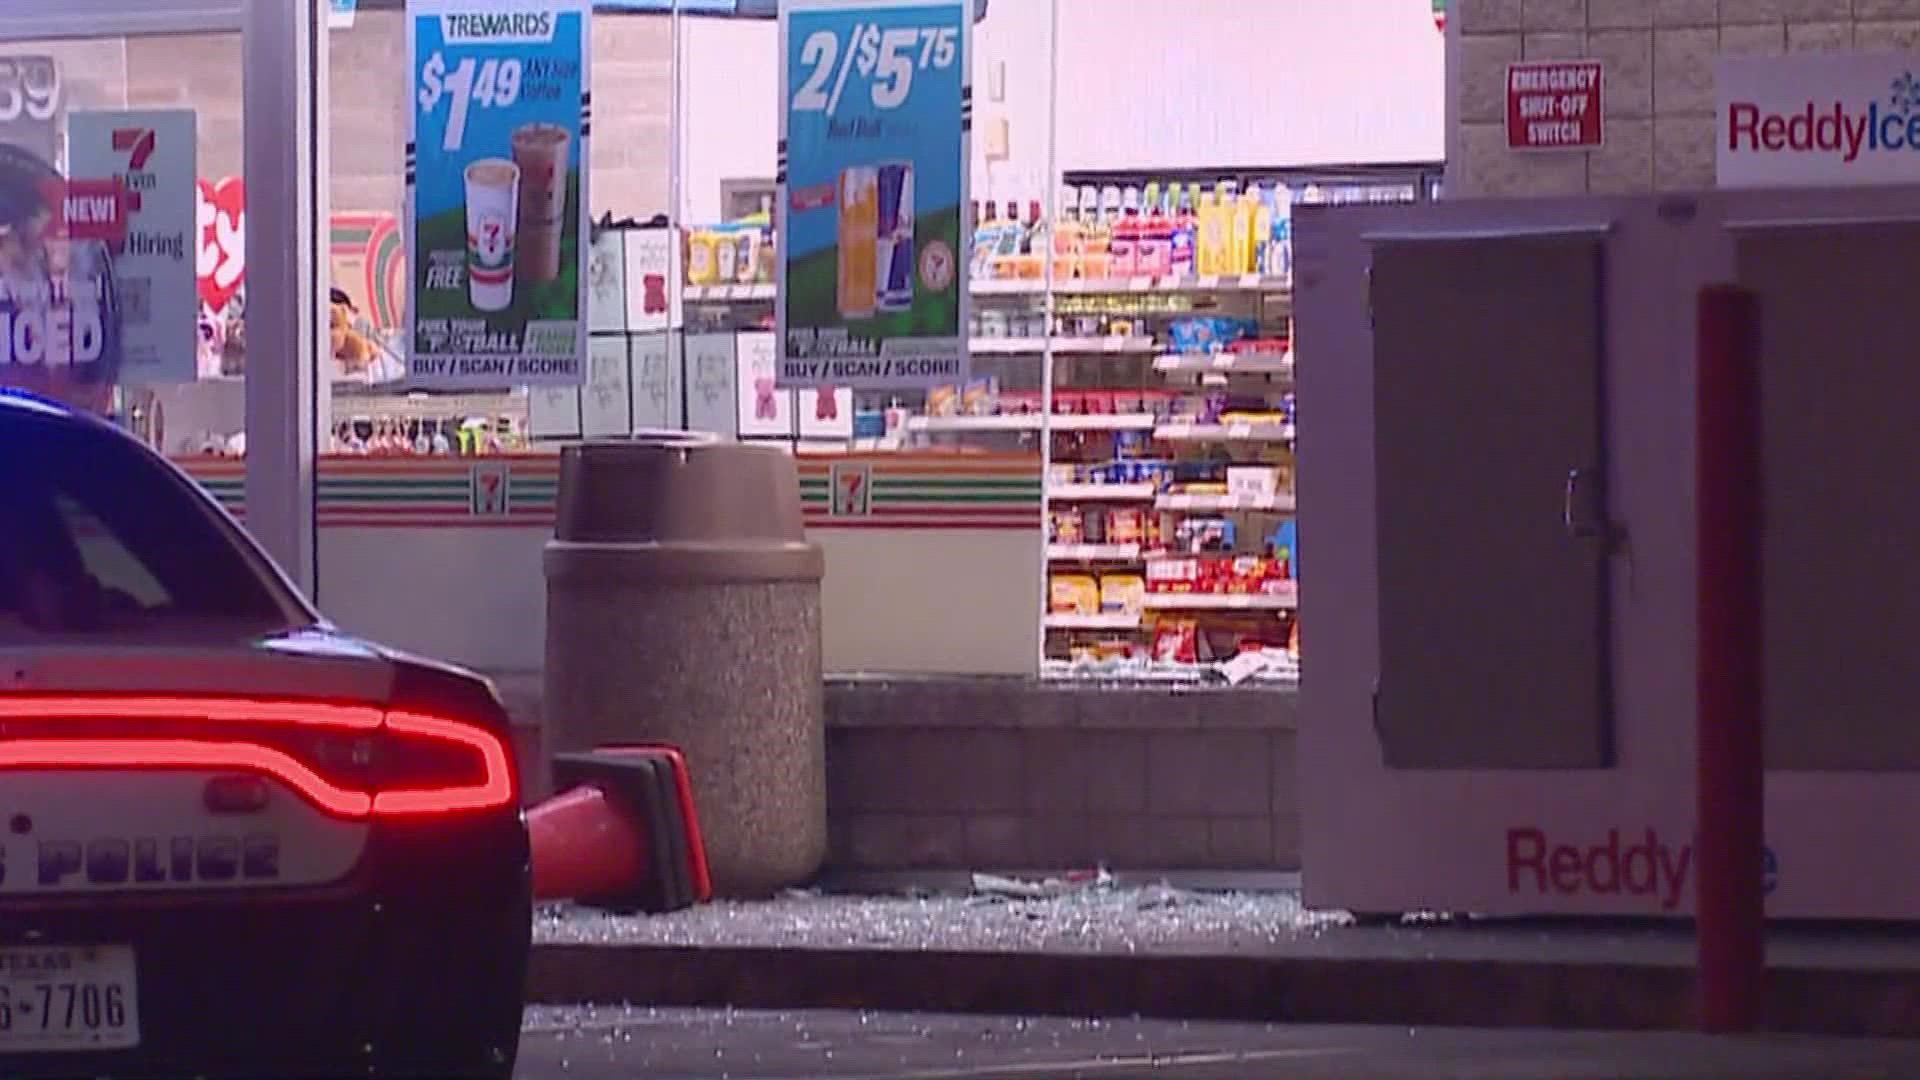 Thieves broke a window at 7-Eleven and dragged an ATM out with a truck.